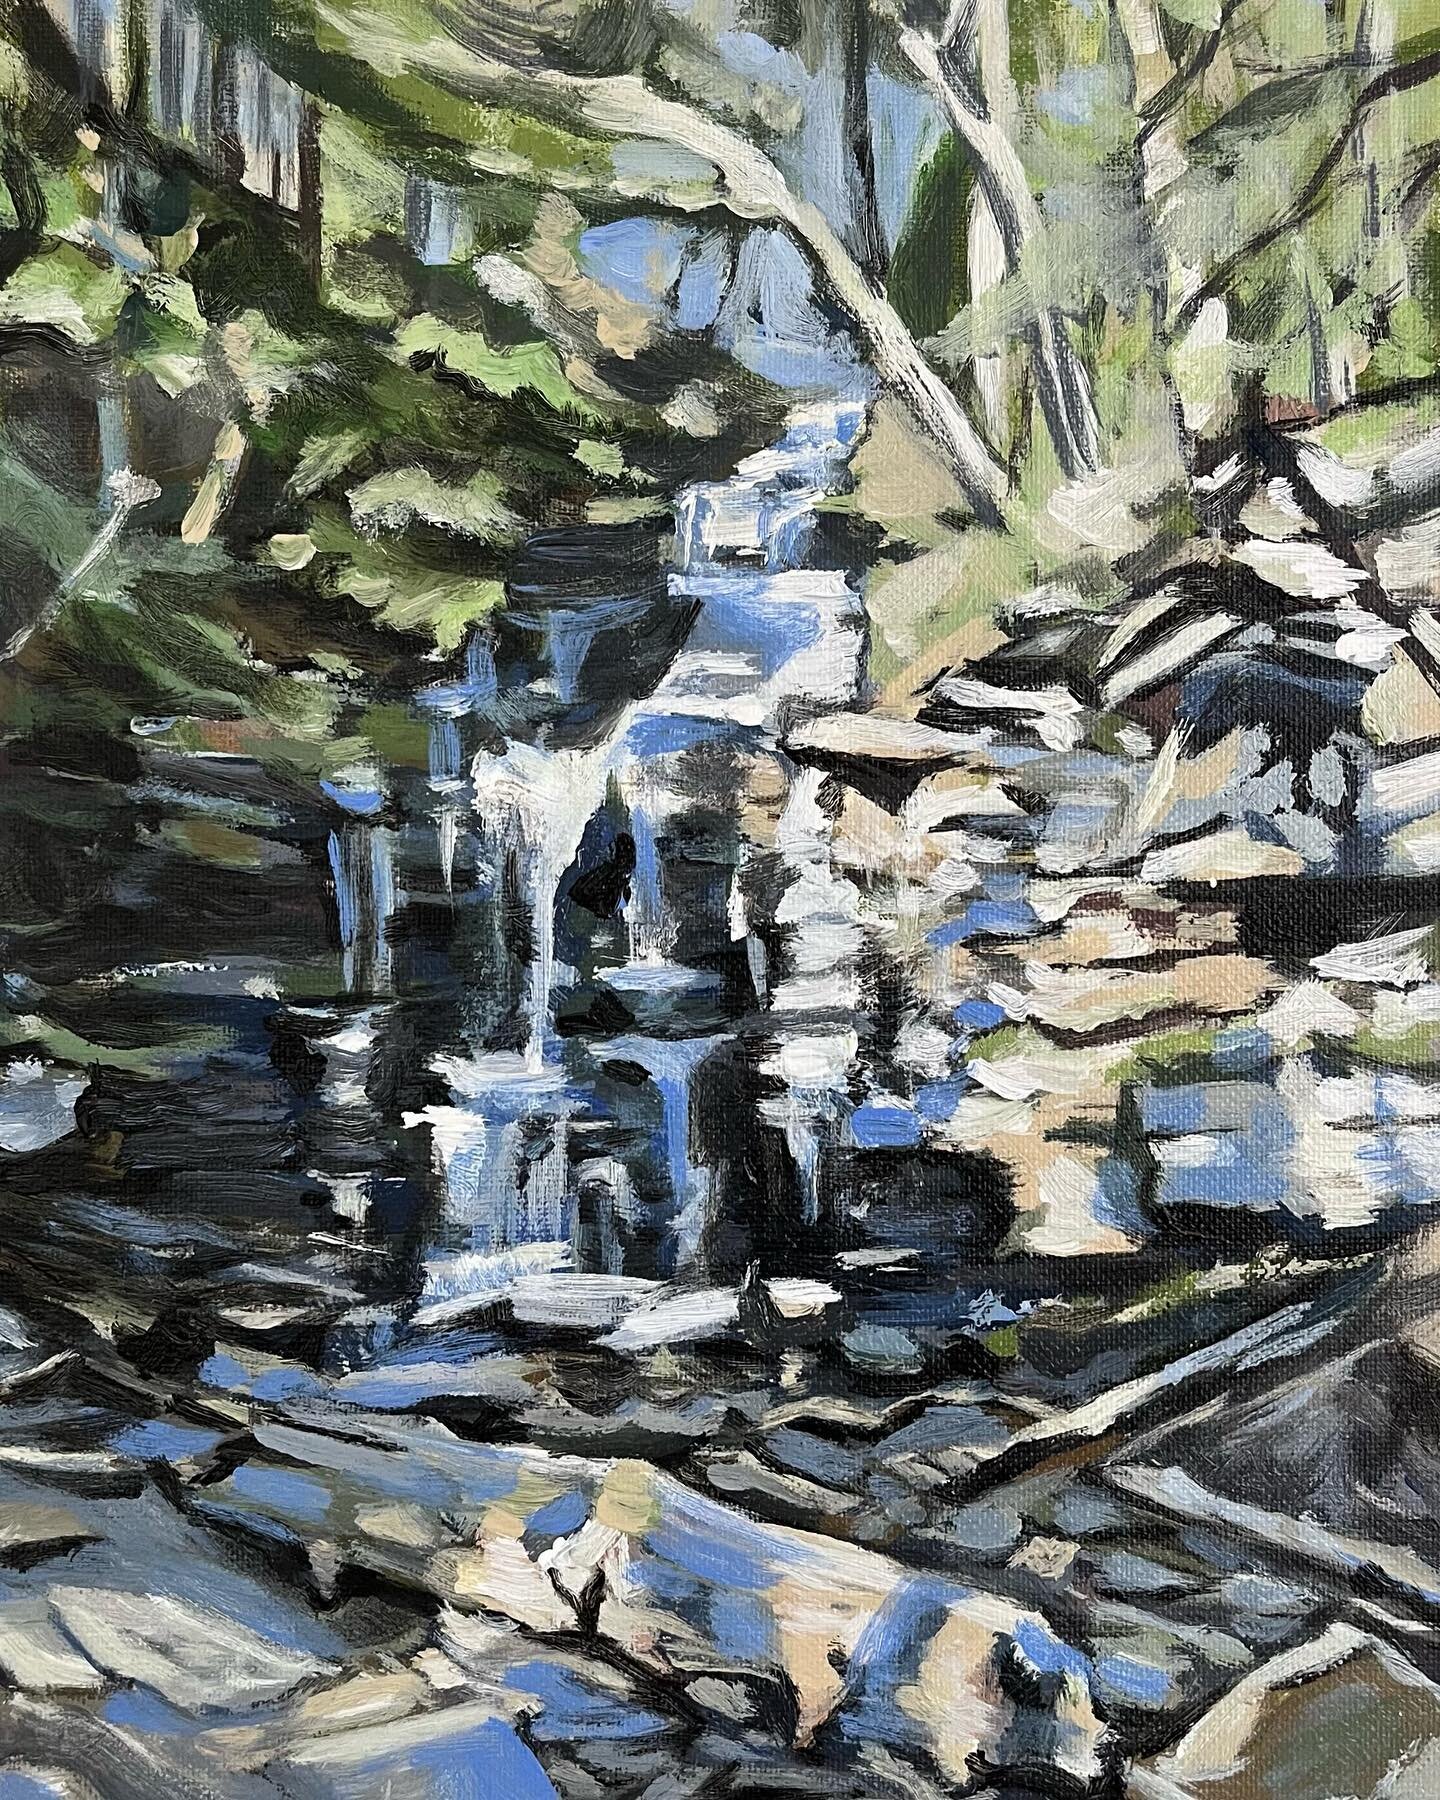 A waterfall at Rickett&rsquo;s Glen State Park. #landscapepainting #painting #landscape #waterfall #acrylicpainting #womanartist #baltimoreartist #forsalesoon